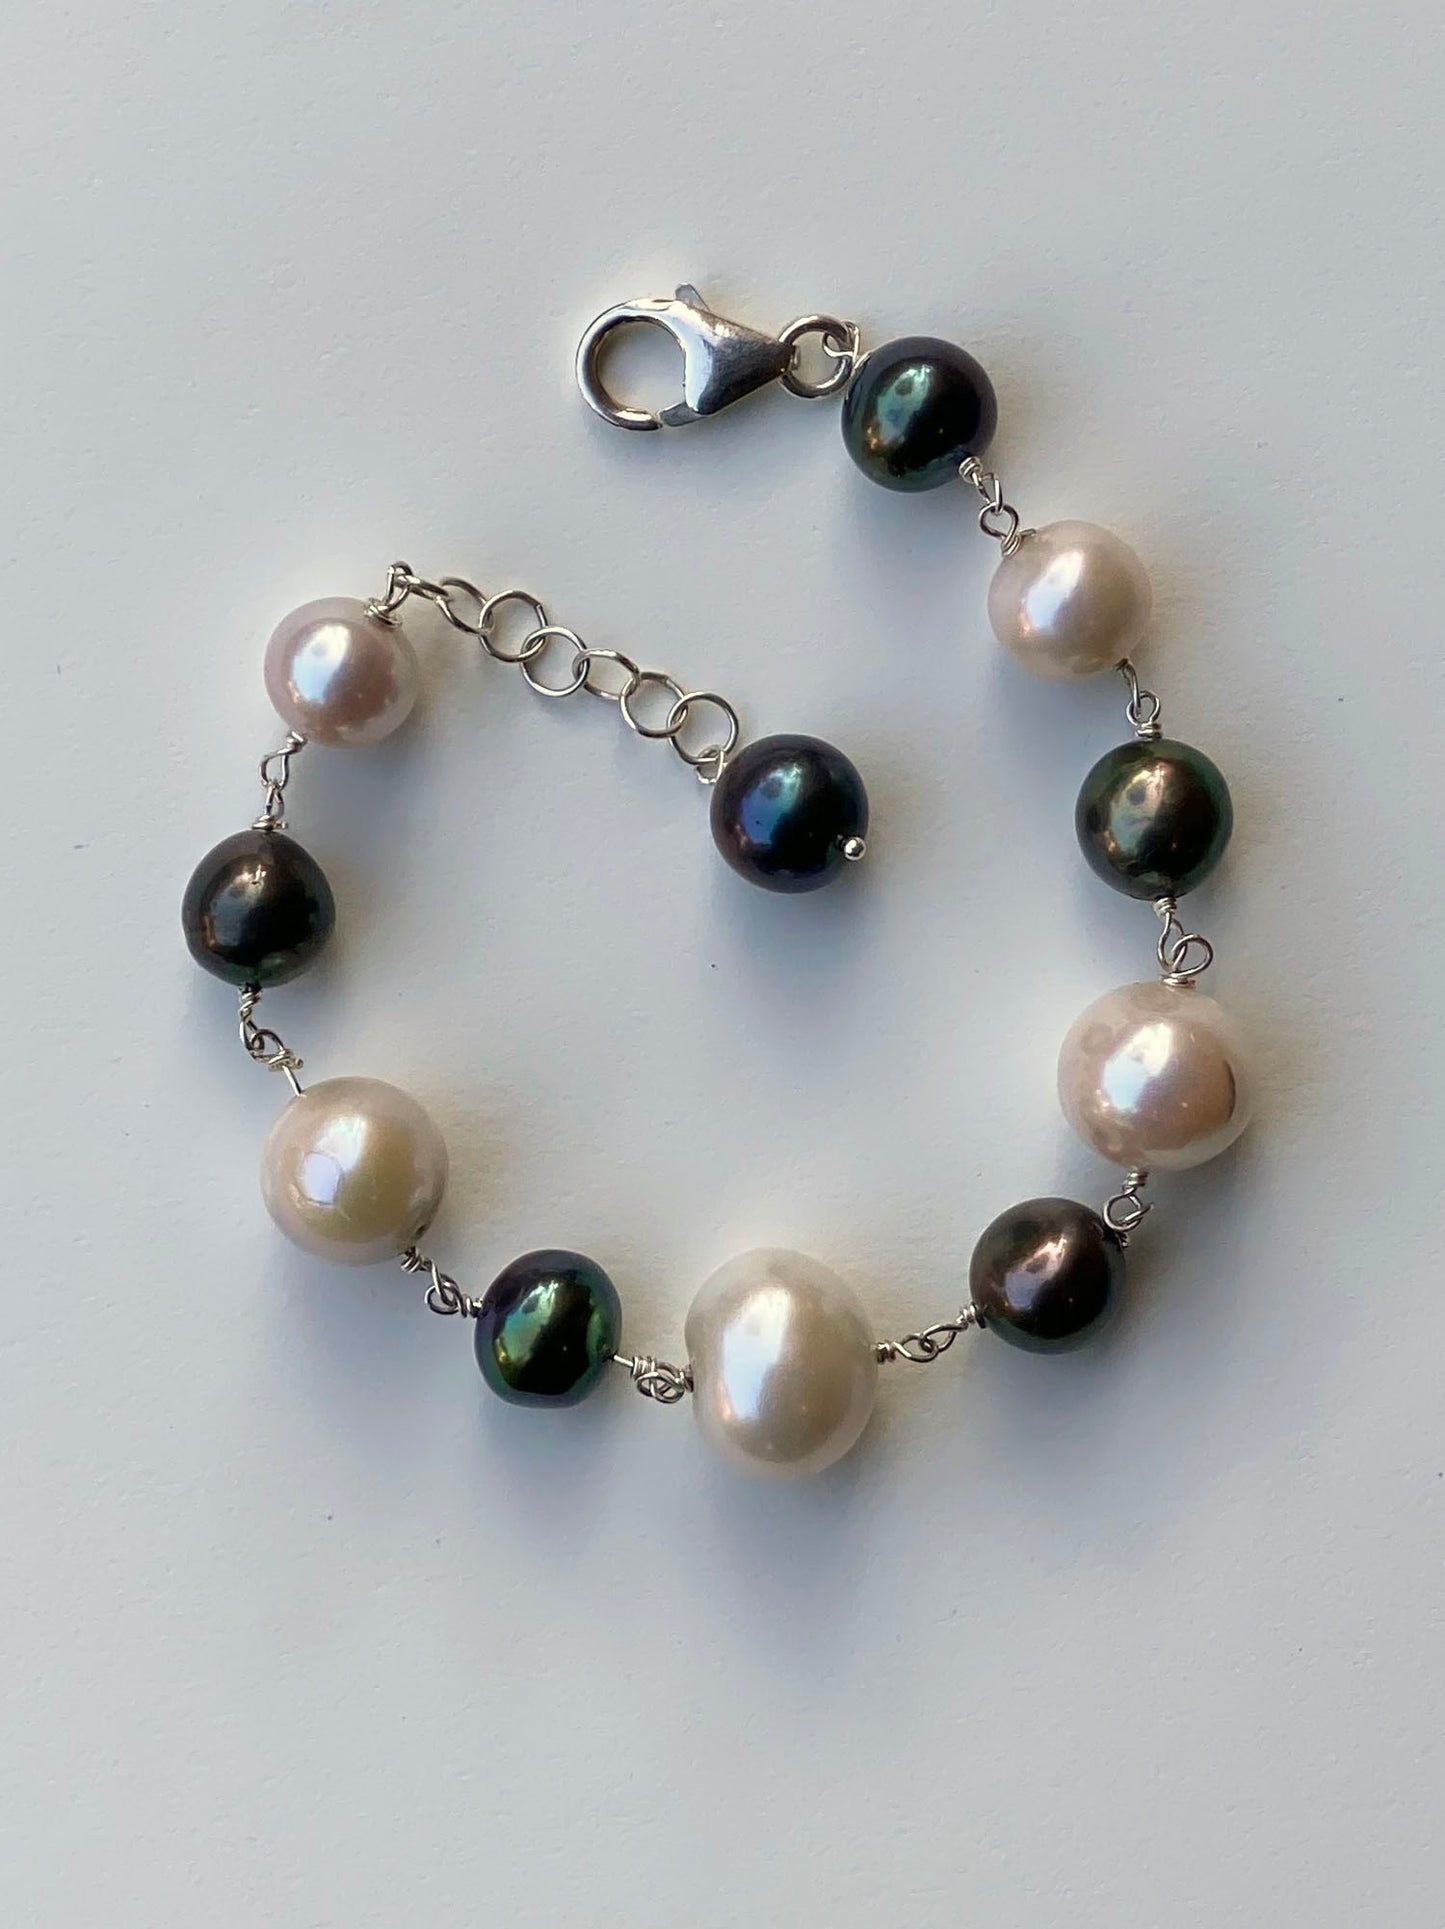 Black and White Freshwater Pearl Bracelet by Linda Queally